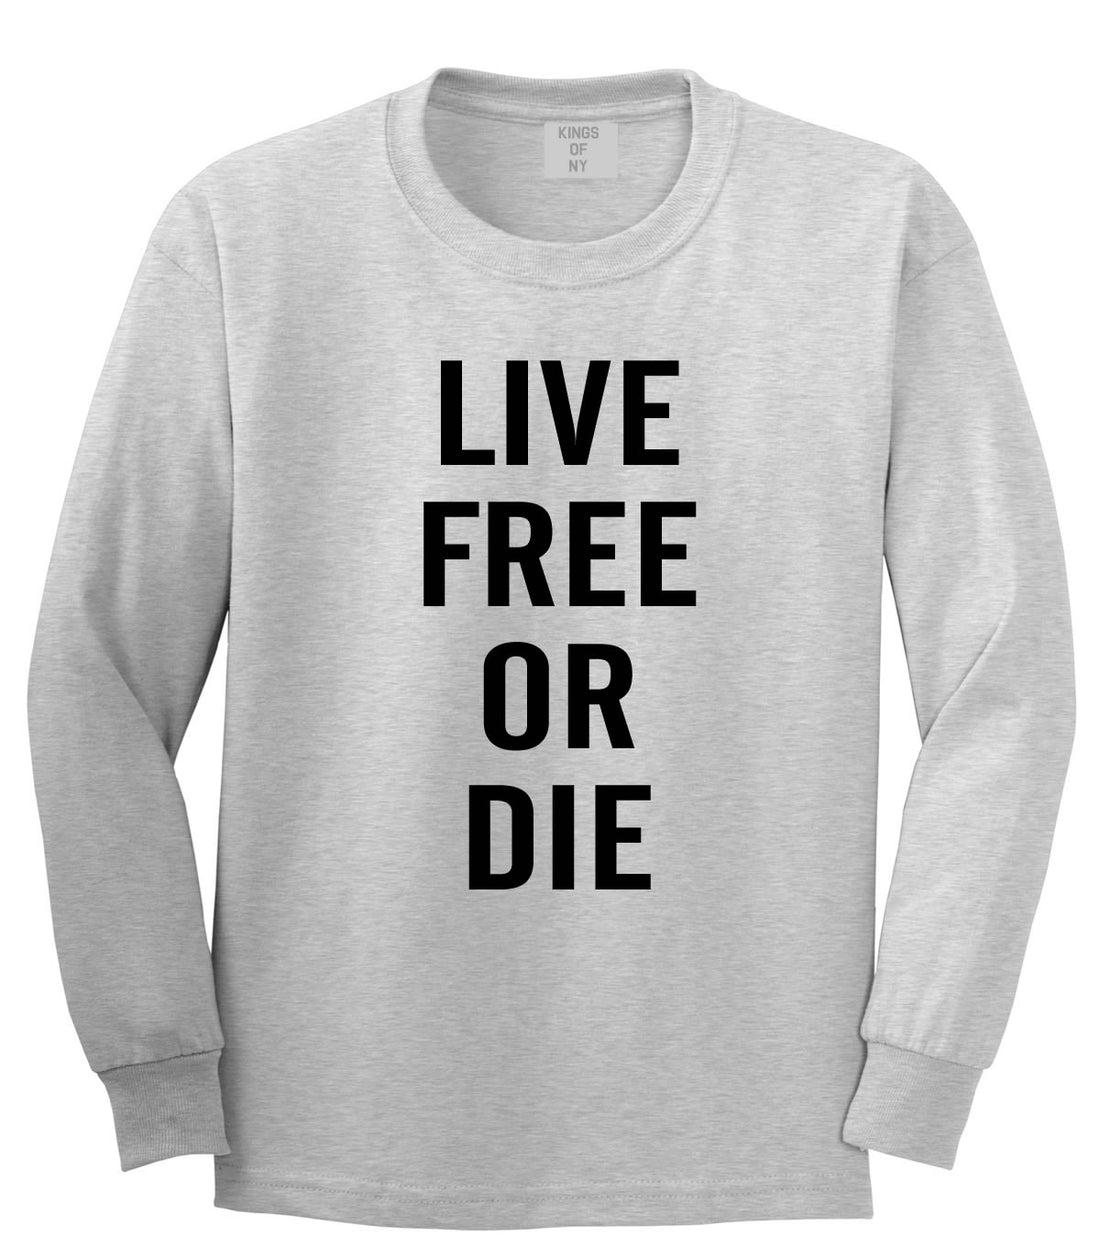 Live Free Or Die Long Sleeve T-Shirt in Grey By Kings Of NY